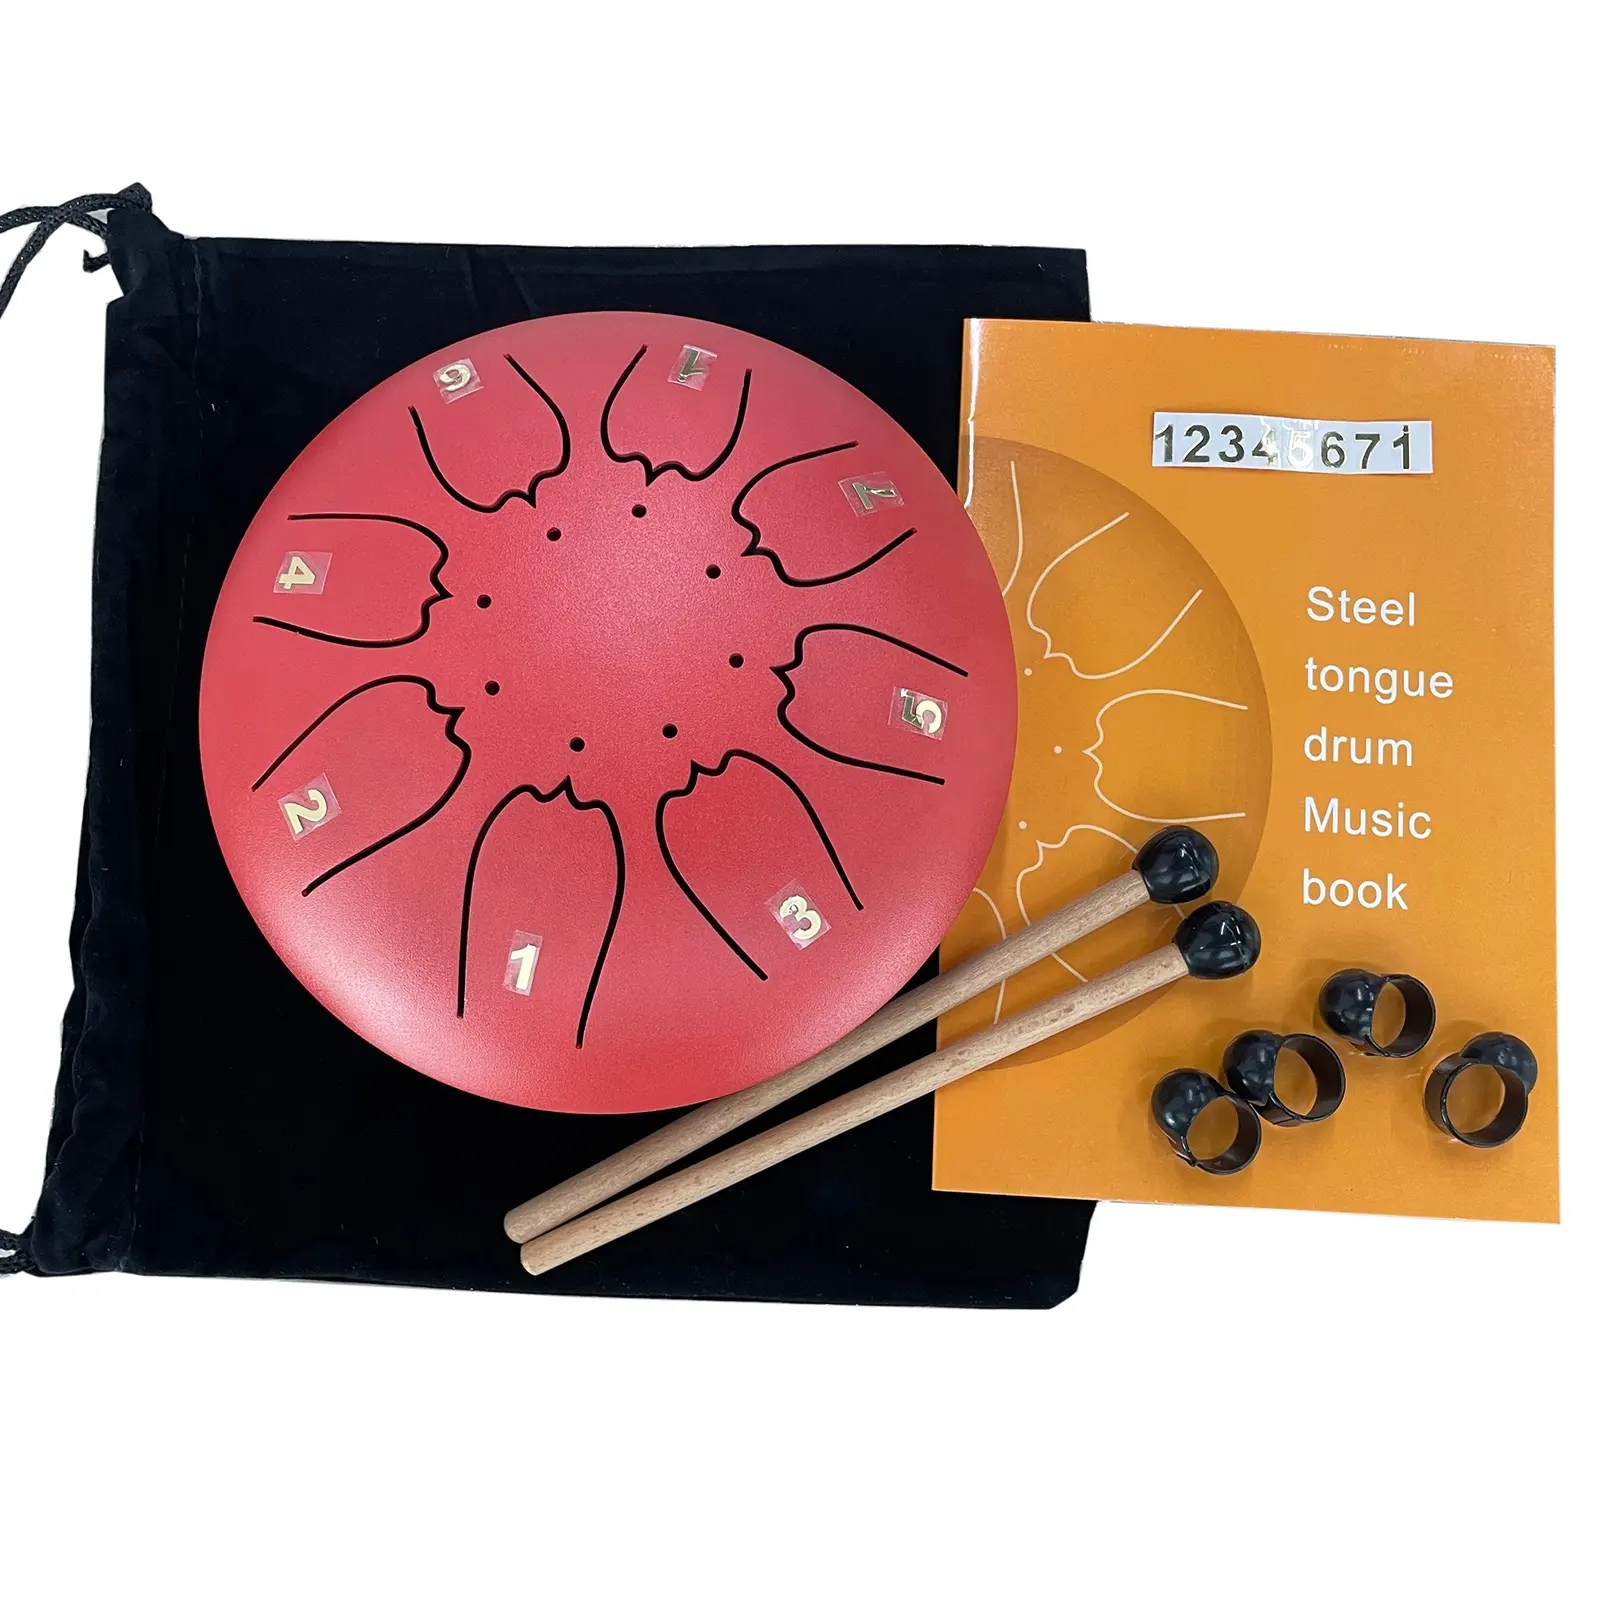 steel tongue drum 6 inches 8 notes percussion instruments Hand Drum Meditation Yoga Musical Education Steel Tongue Drum